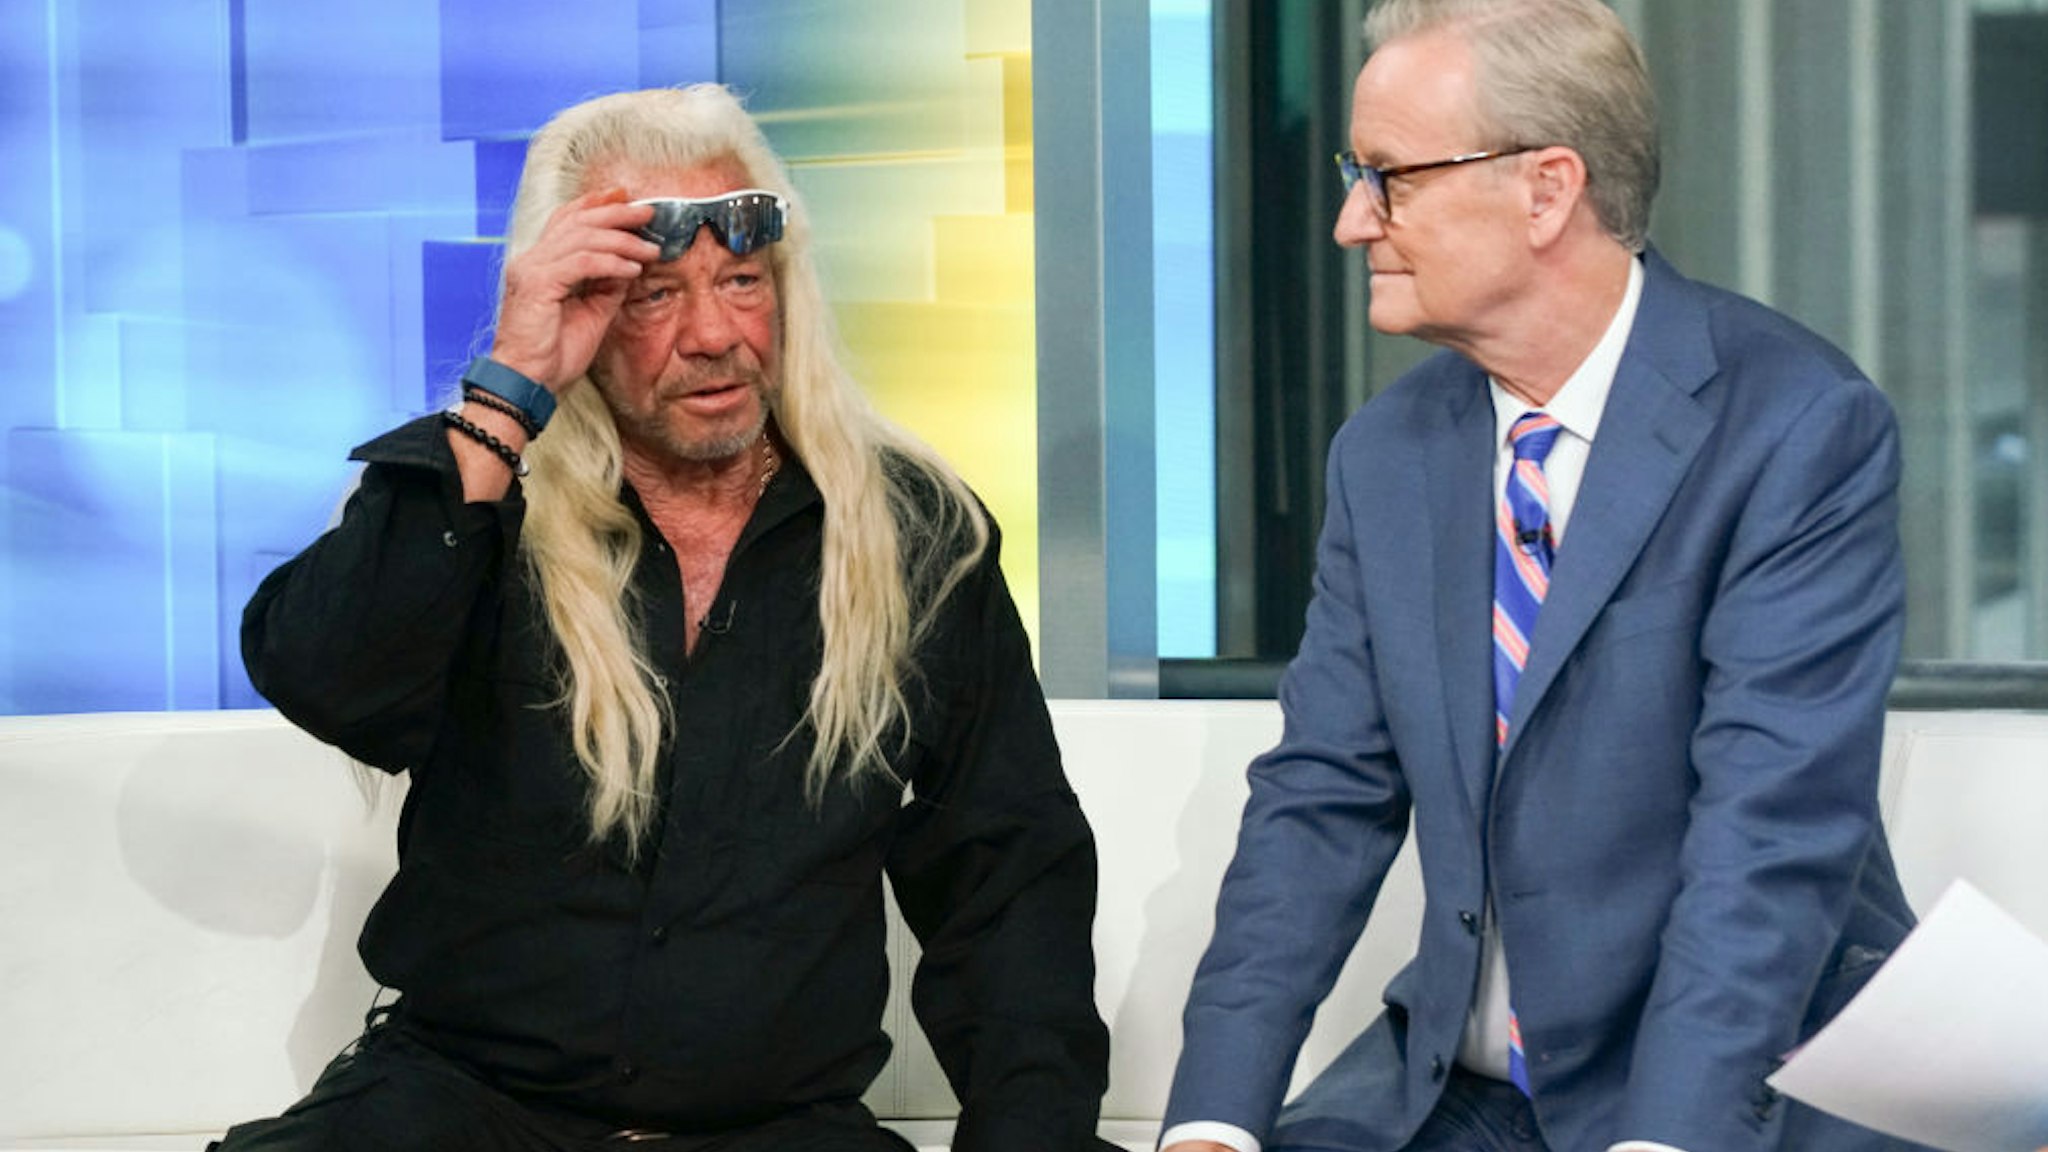 Duane Chapman and Steve Doocy attend "FOX & Friends" at FOX Studios on August 28, 2019 in New York City.